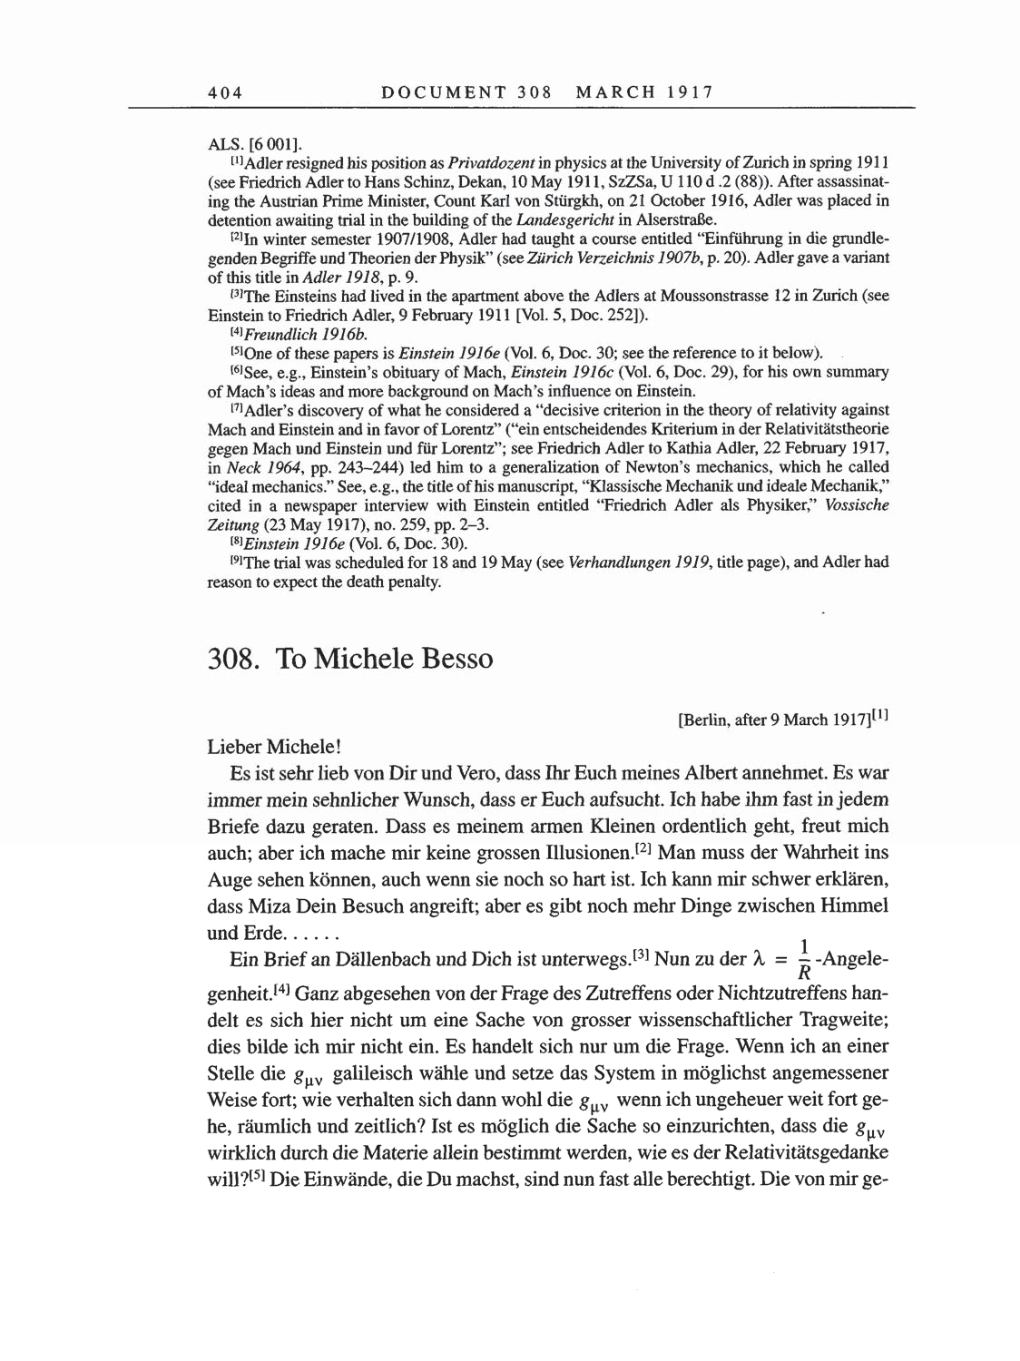 Volume 8, Part A: The Berlin Years: Correspondence 1914-1917 page 404